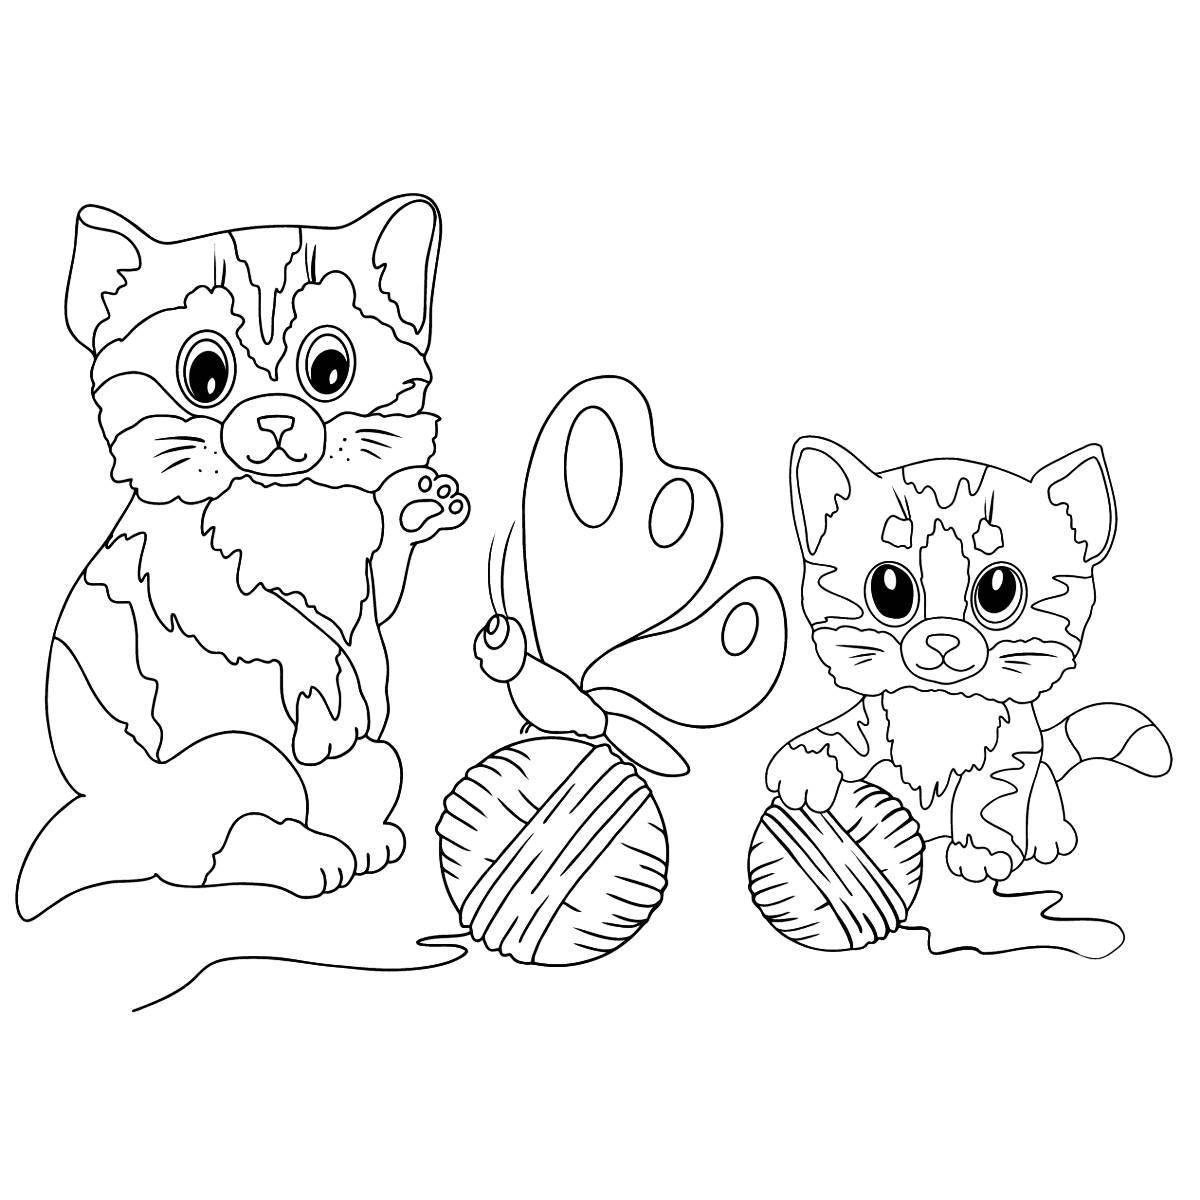 Coloring page frolicking kitten with a ball